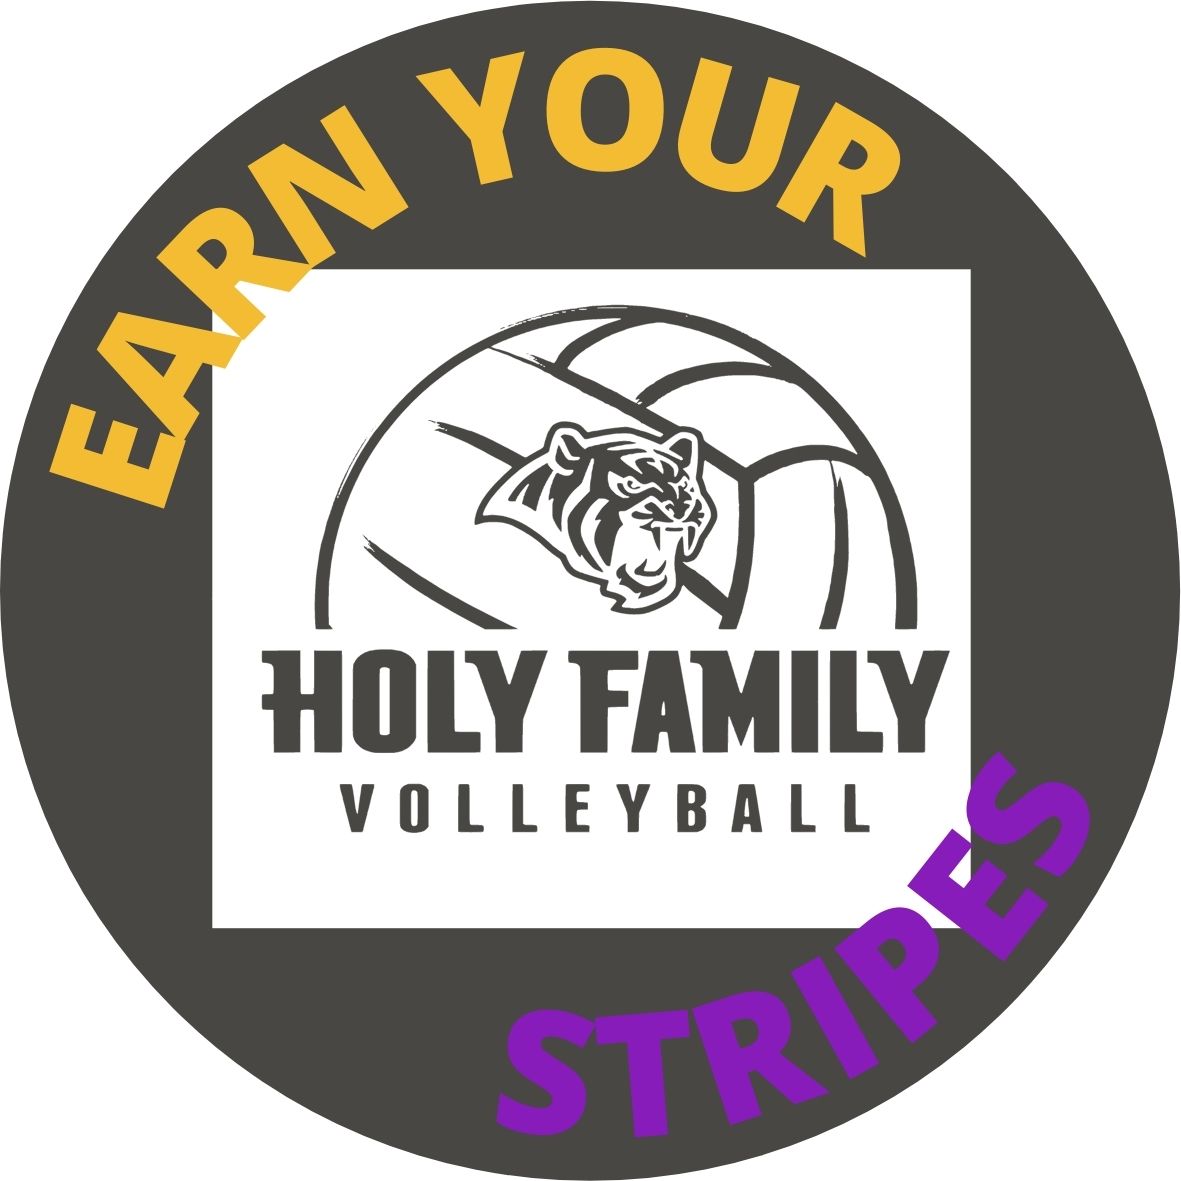 Holy Family Volleyball Team Building - Wednesday, November 1st  - 4:30pm